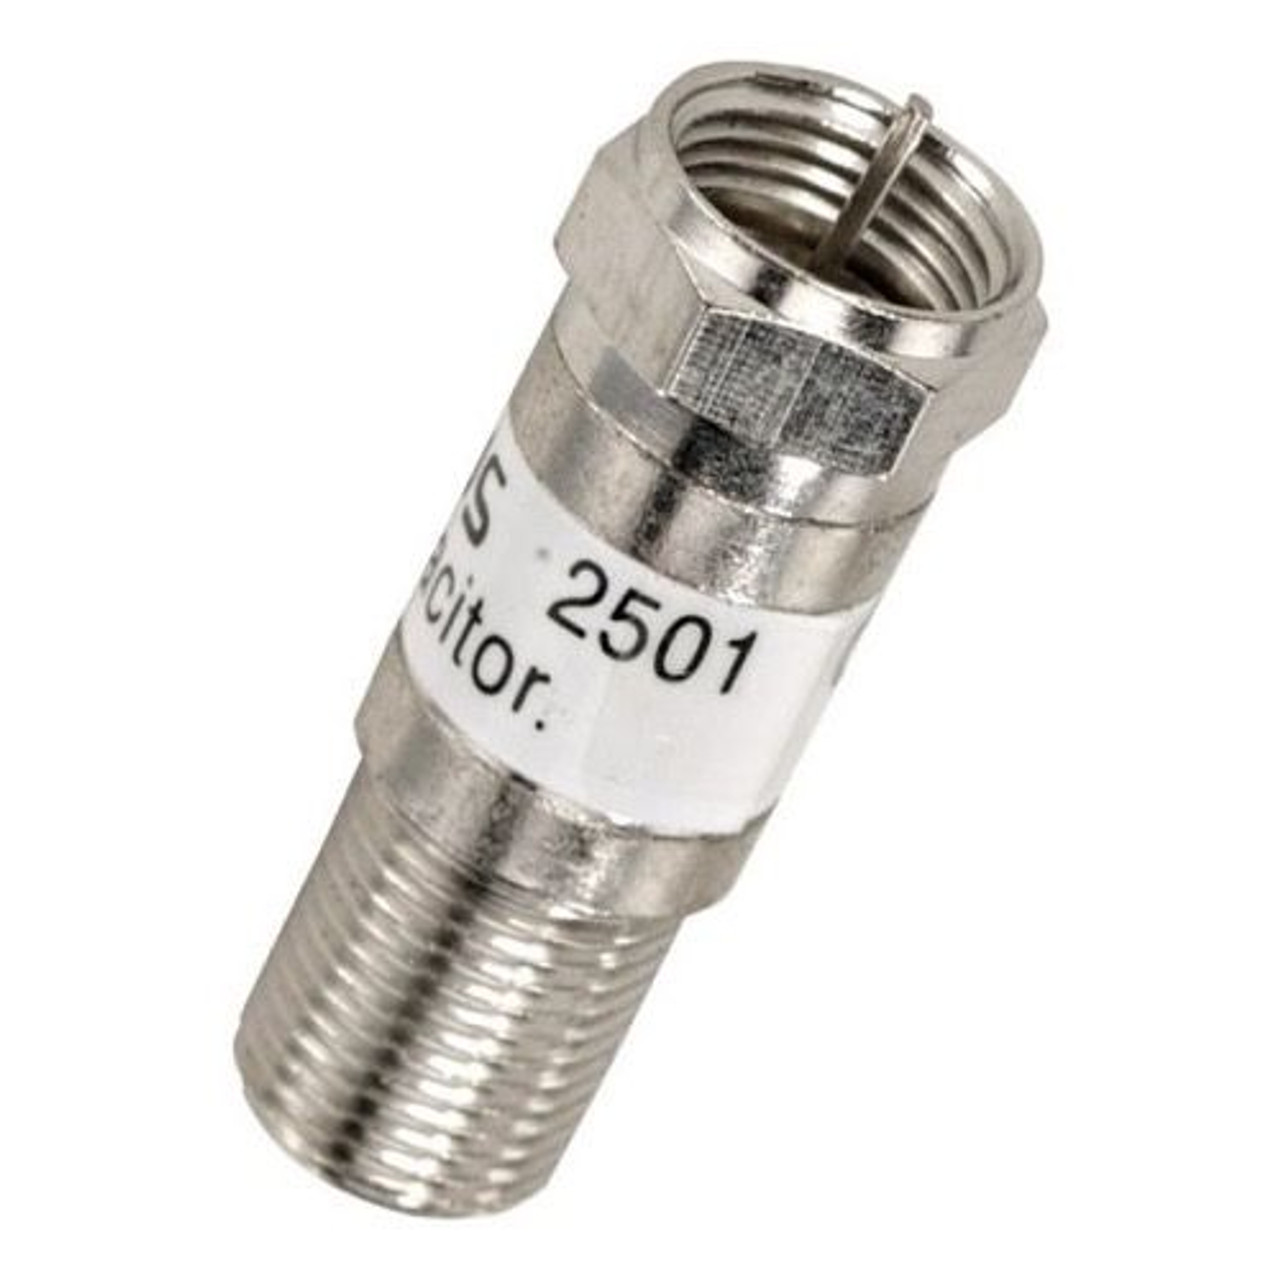 Linear 2501 DC Blocking Capacitor In-Line Blocking Capacitor F-Connector Type DC Block and IR Control Pulses Passes RF Signal 75 Ohm Female to Male 1 Pack Coaxial Cable Connector Plug Adapter, Part # 2501